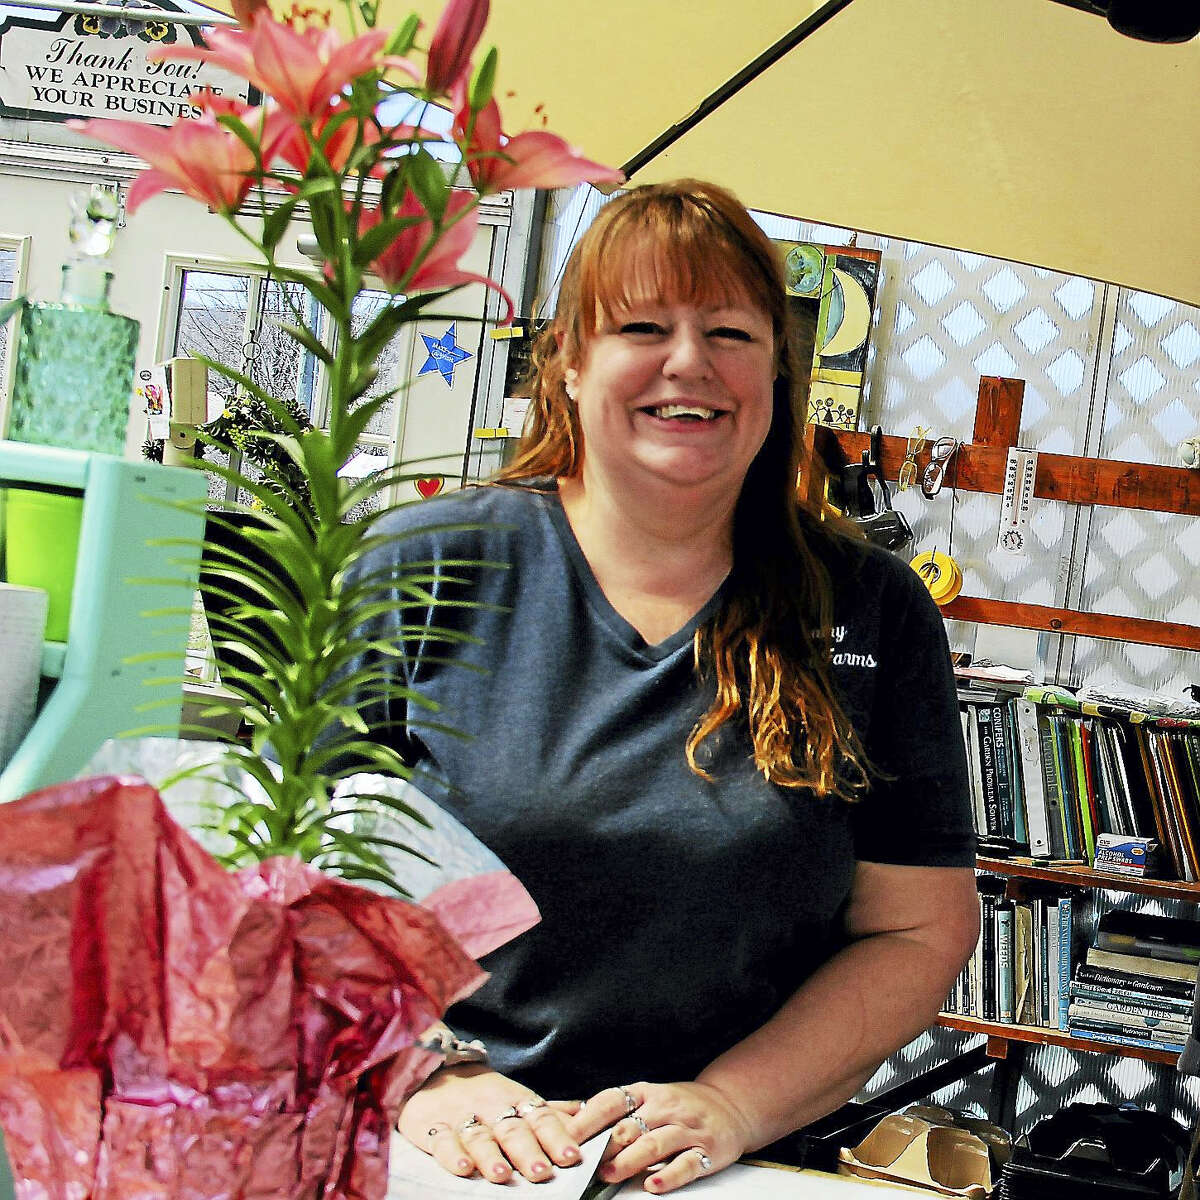 Customers meet a smiling Mary LeHerissier working behind the register at Country Flower Farm in Durham. The locally owned business organically grows all its stock, from flowers and plants to herbs and succulents.